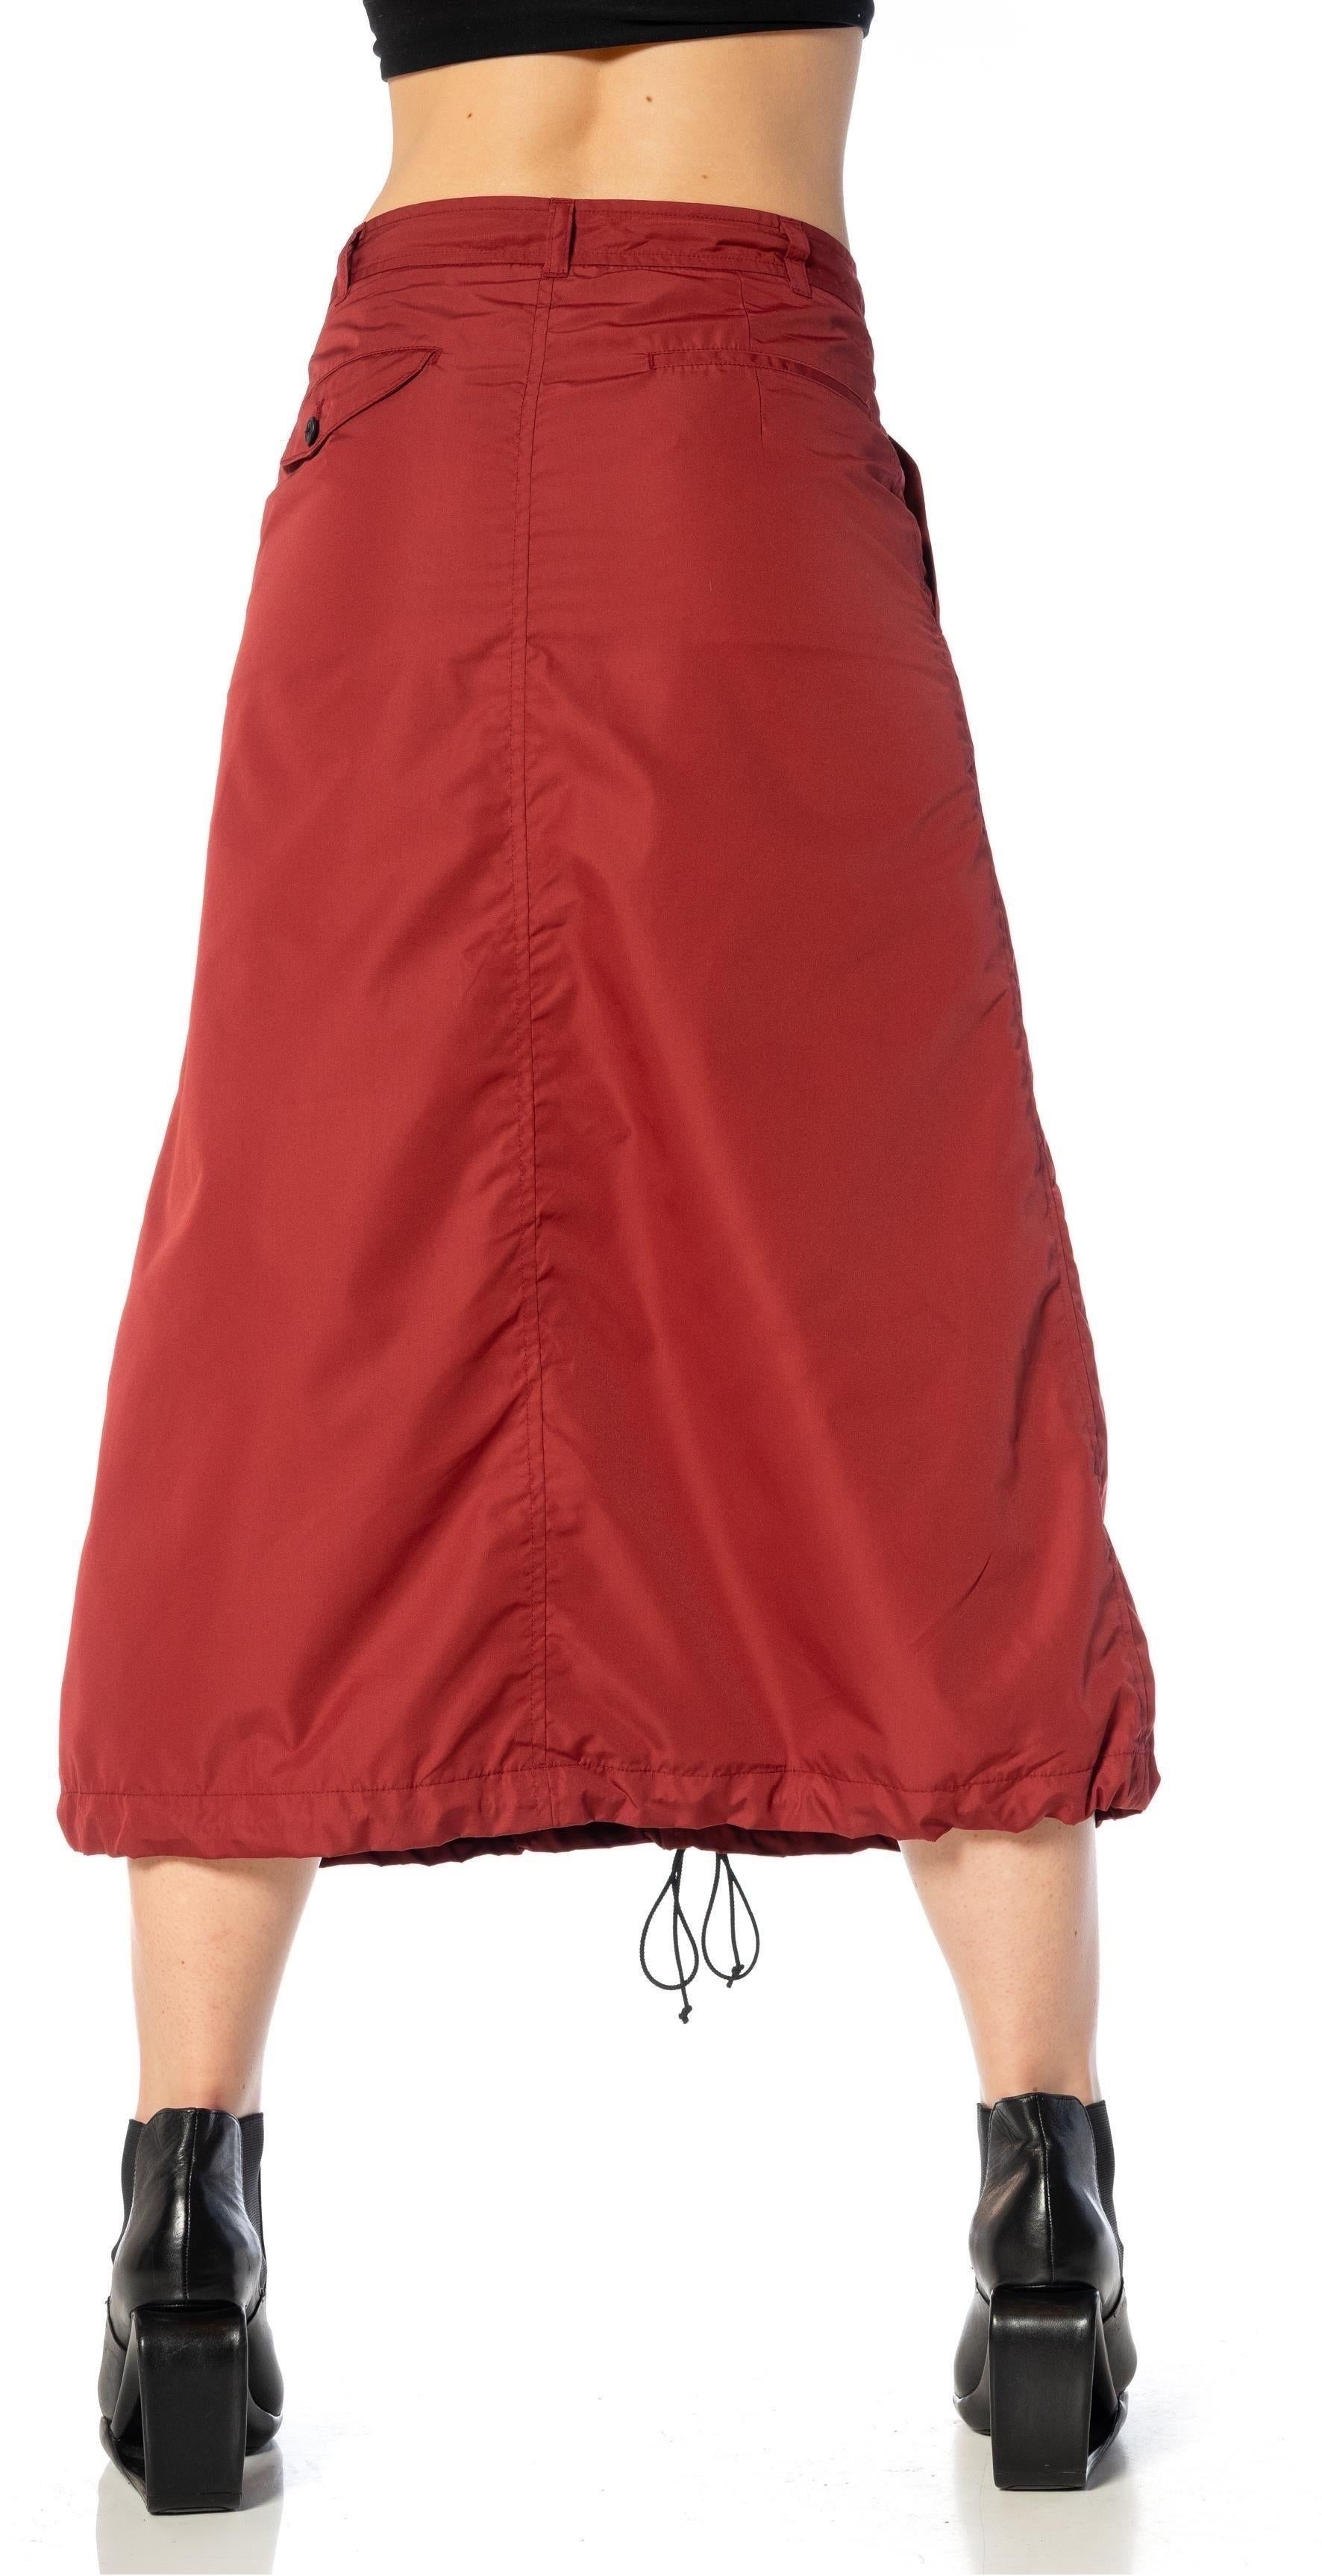 2000S COMME DES GARCONS Burgundy Polyester Parachute Skirt With Drawstring Hem  For Sale 6